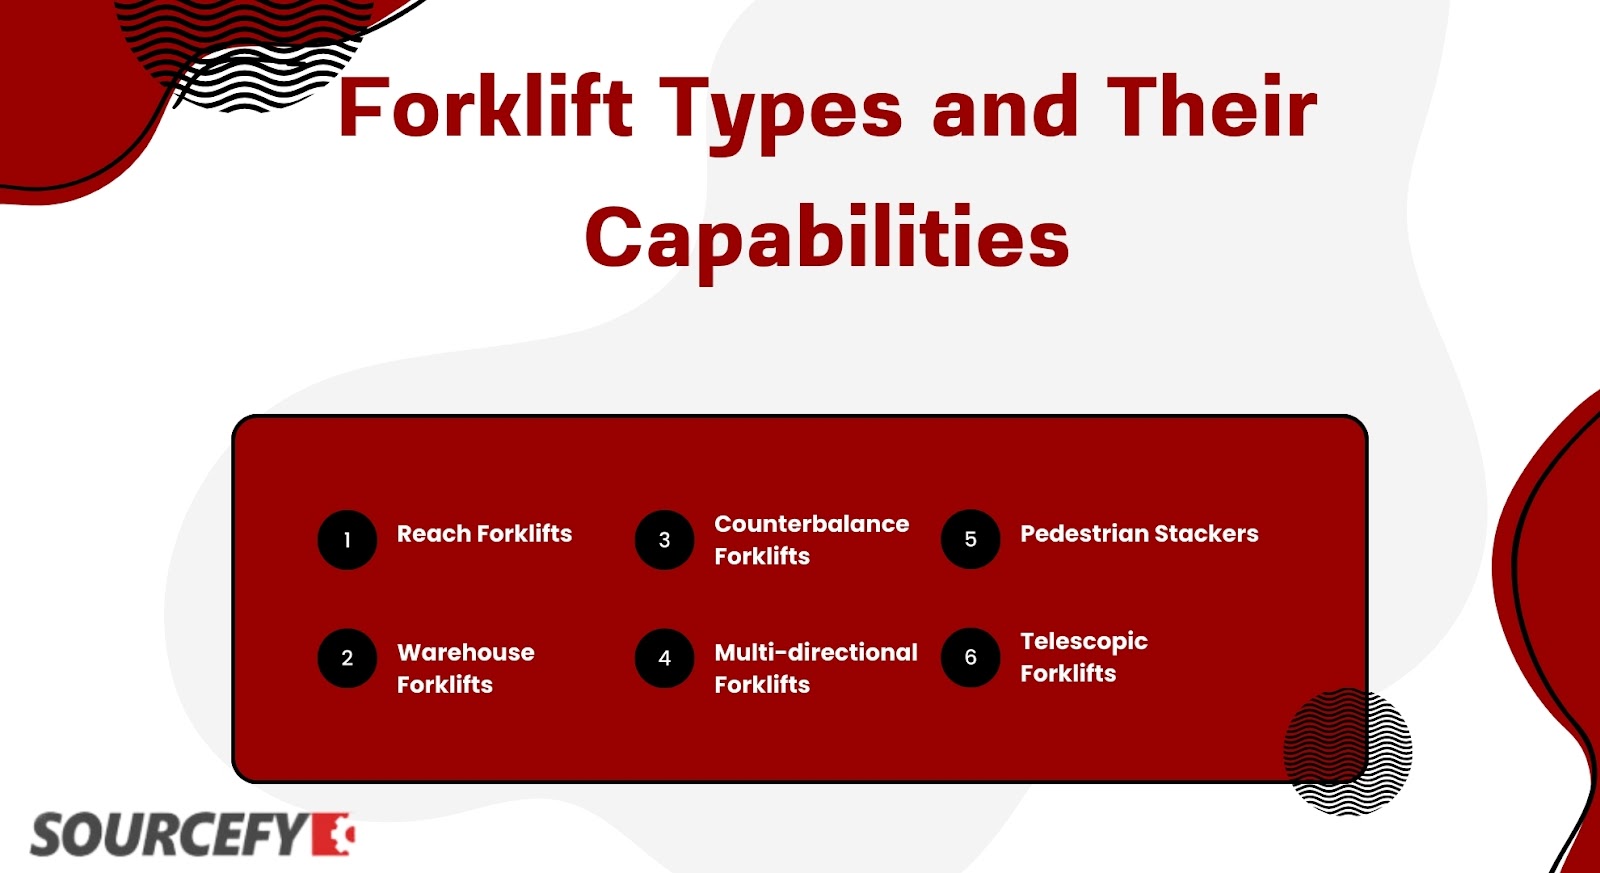 Forklift Types and Their Capabilities